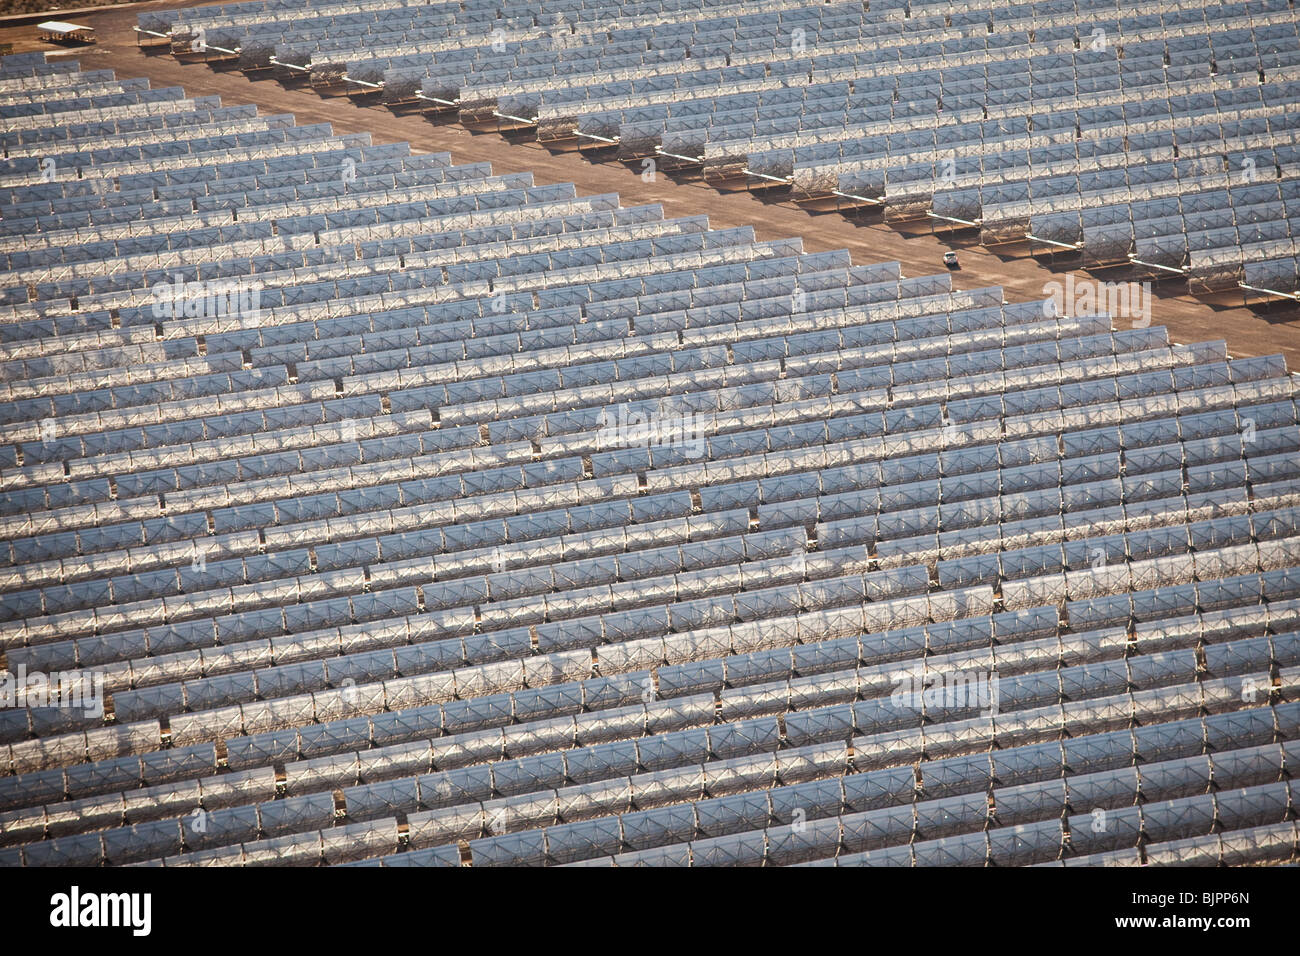 Aerial view of Nevada Solar One generating station, the largest concentrated solar power plant in the world In Boulder City, NV. Stock Photo